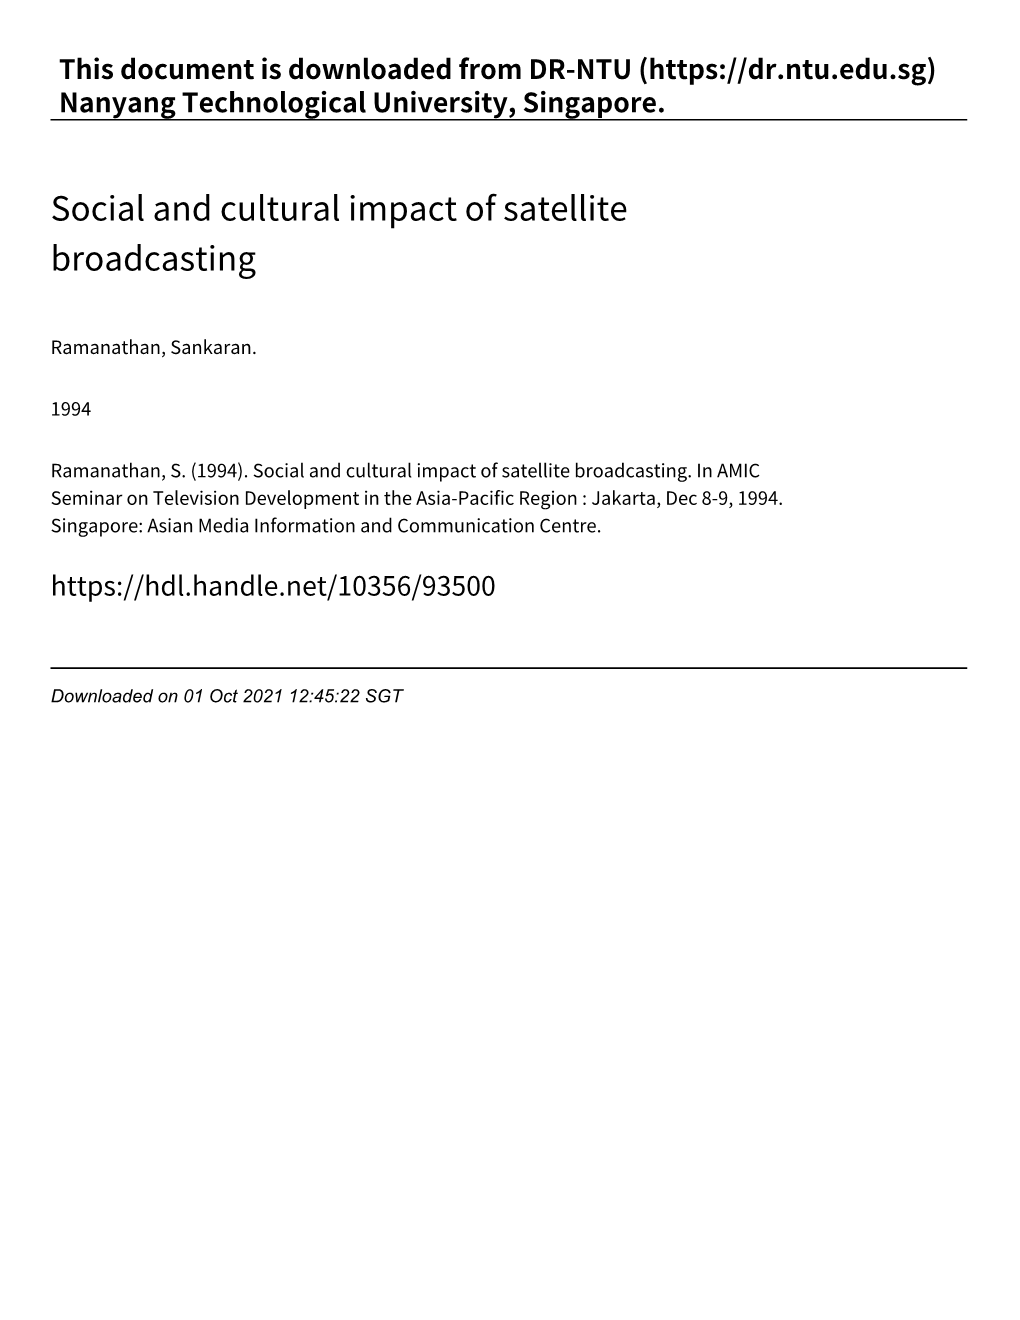 Social and Cultural Impact of Satellite Broadcasting